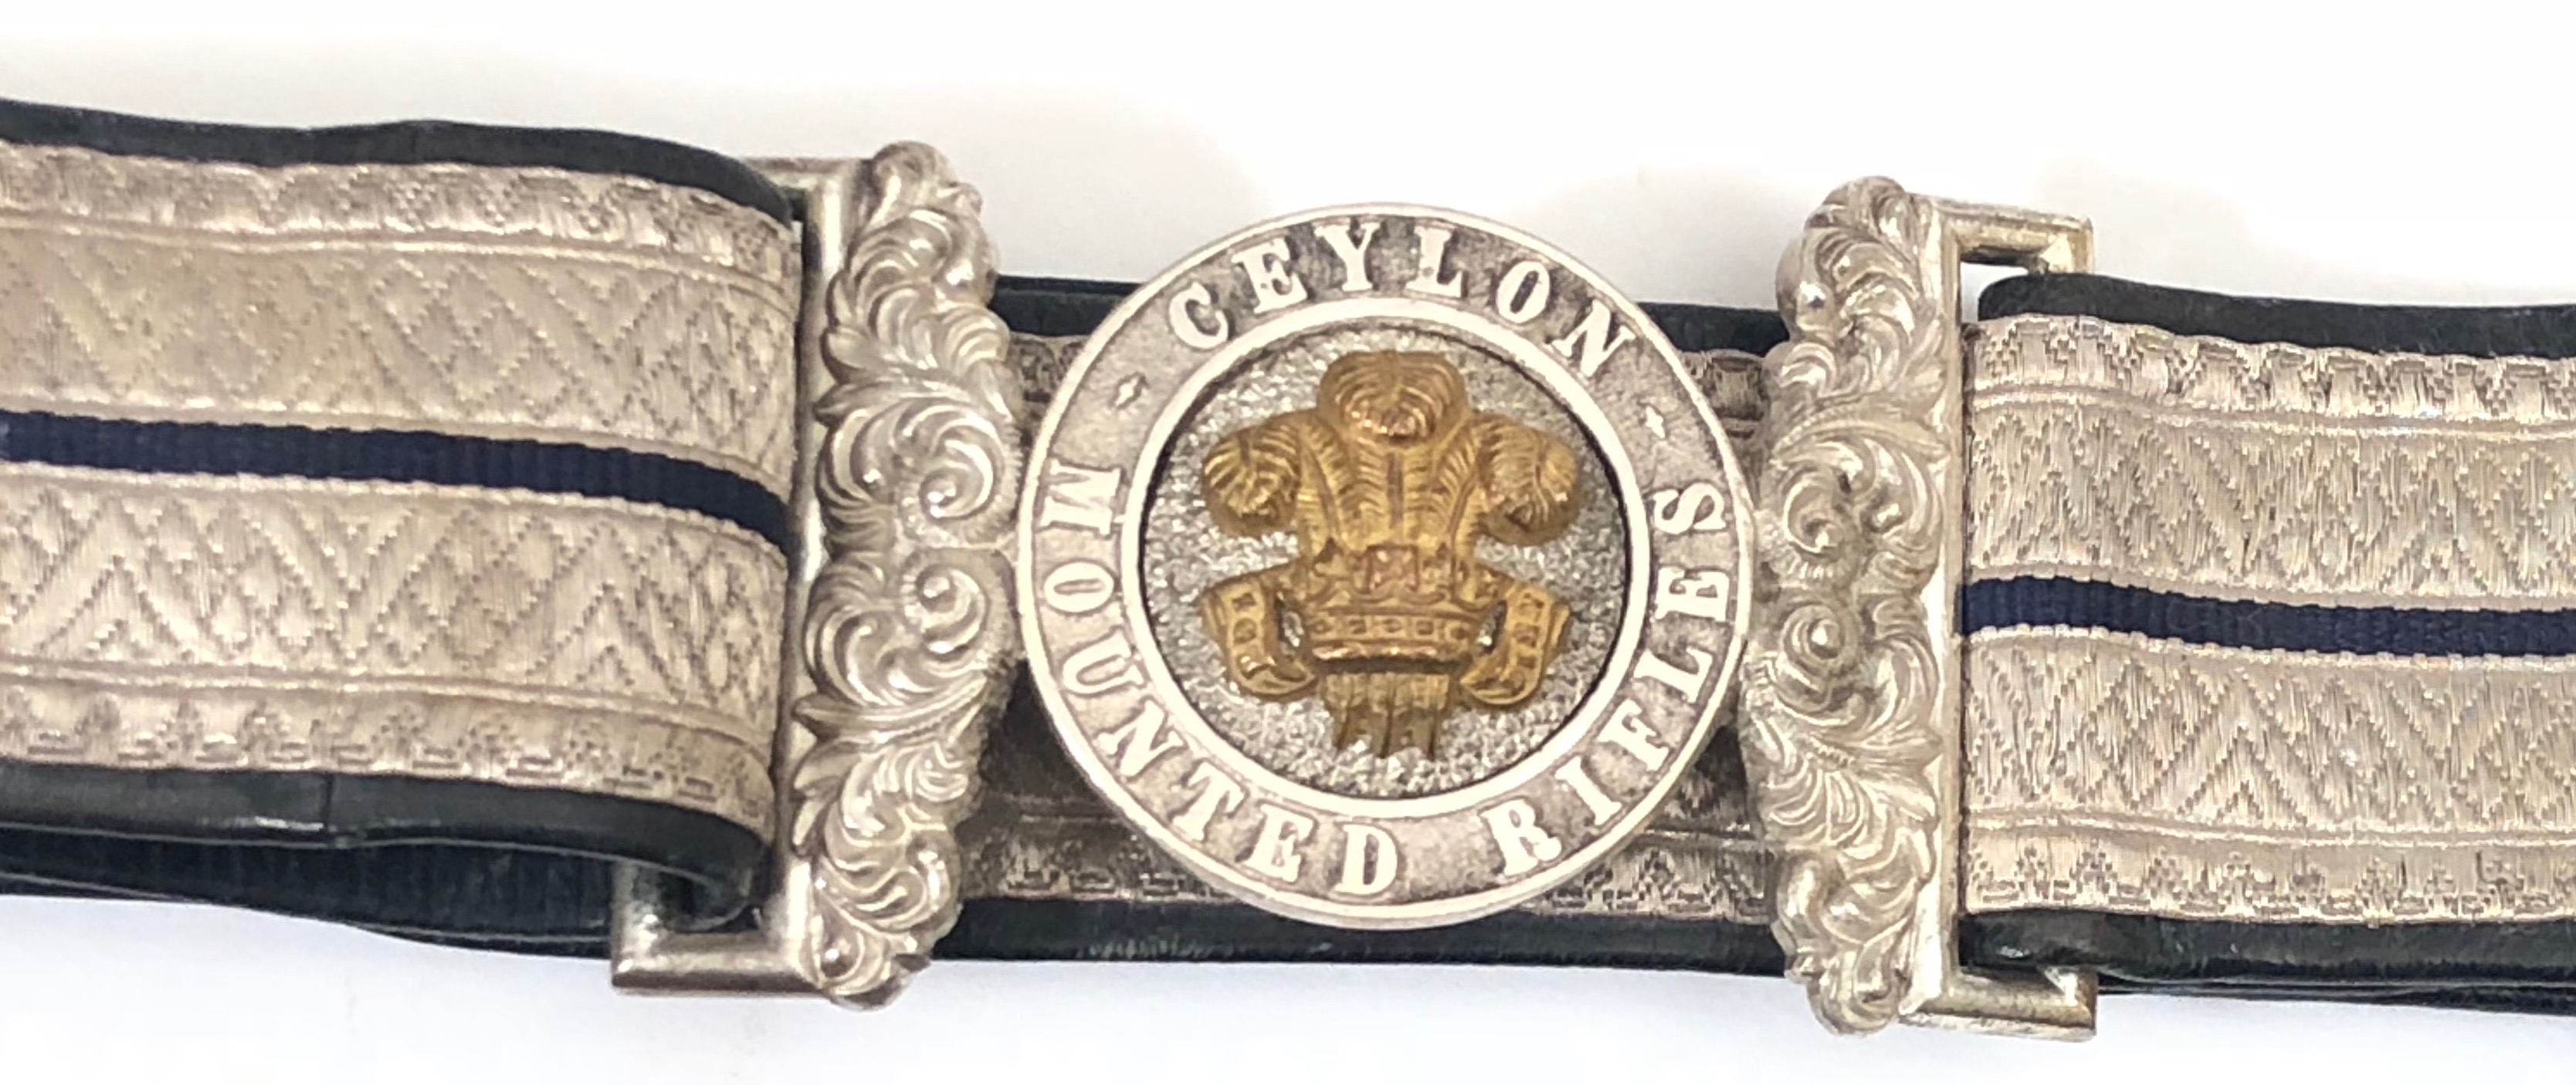 Ceylon Mounted Rifles Officer sword belt. Fine scarce example by Hobson and Sons (London)